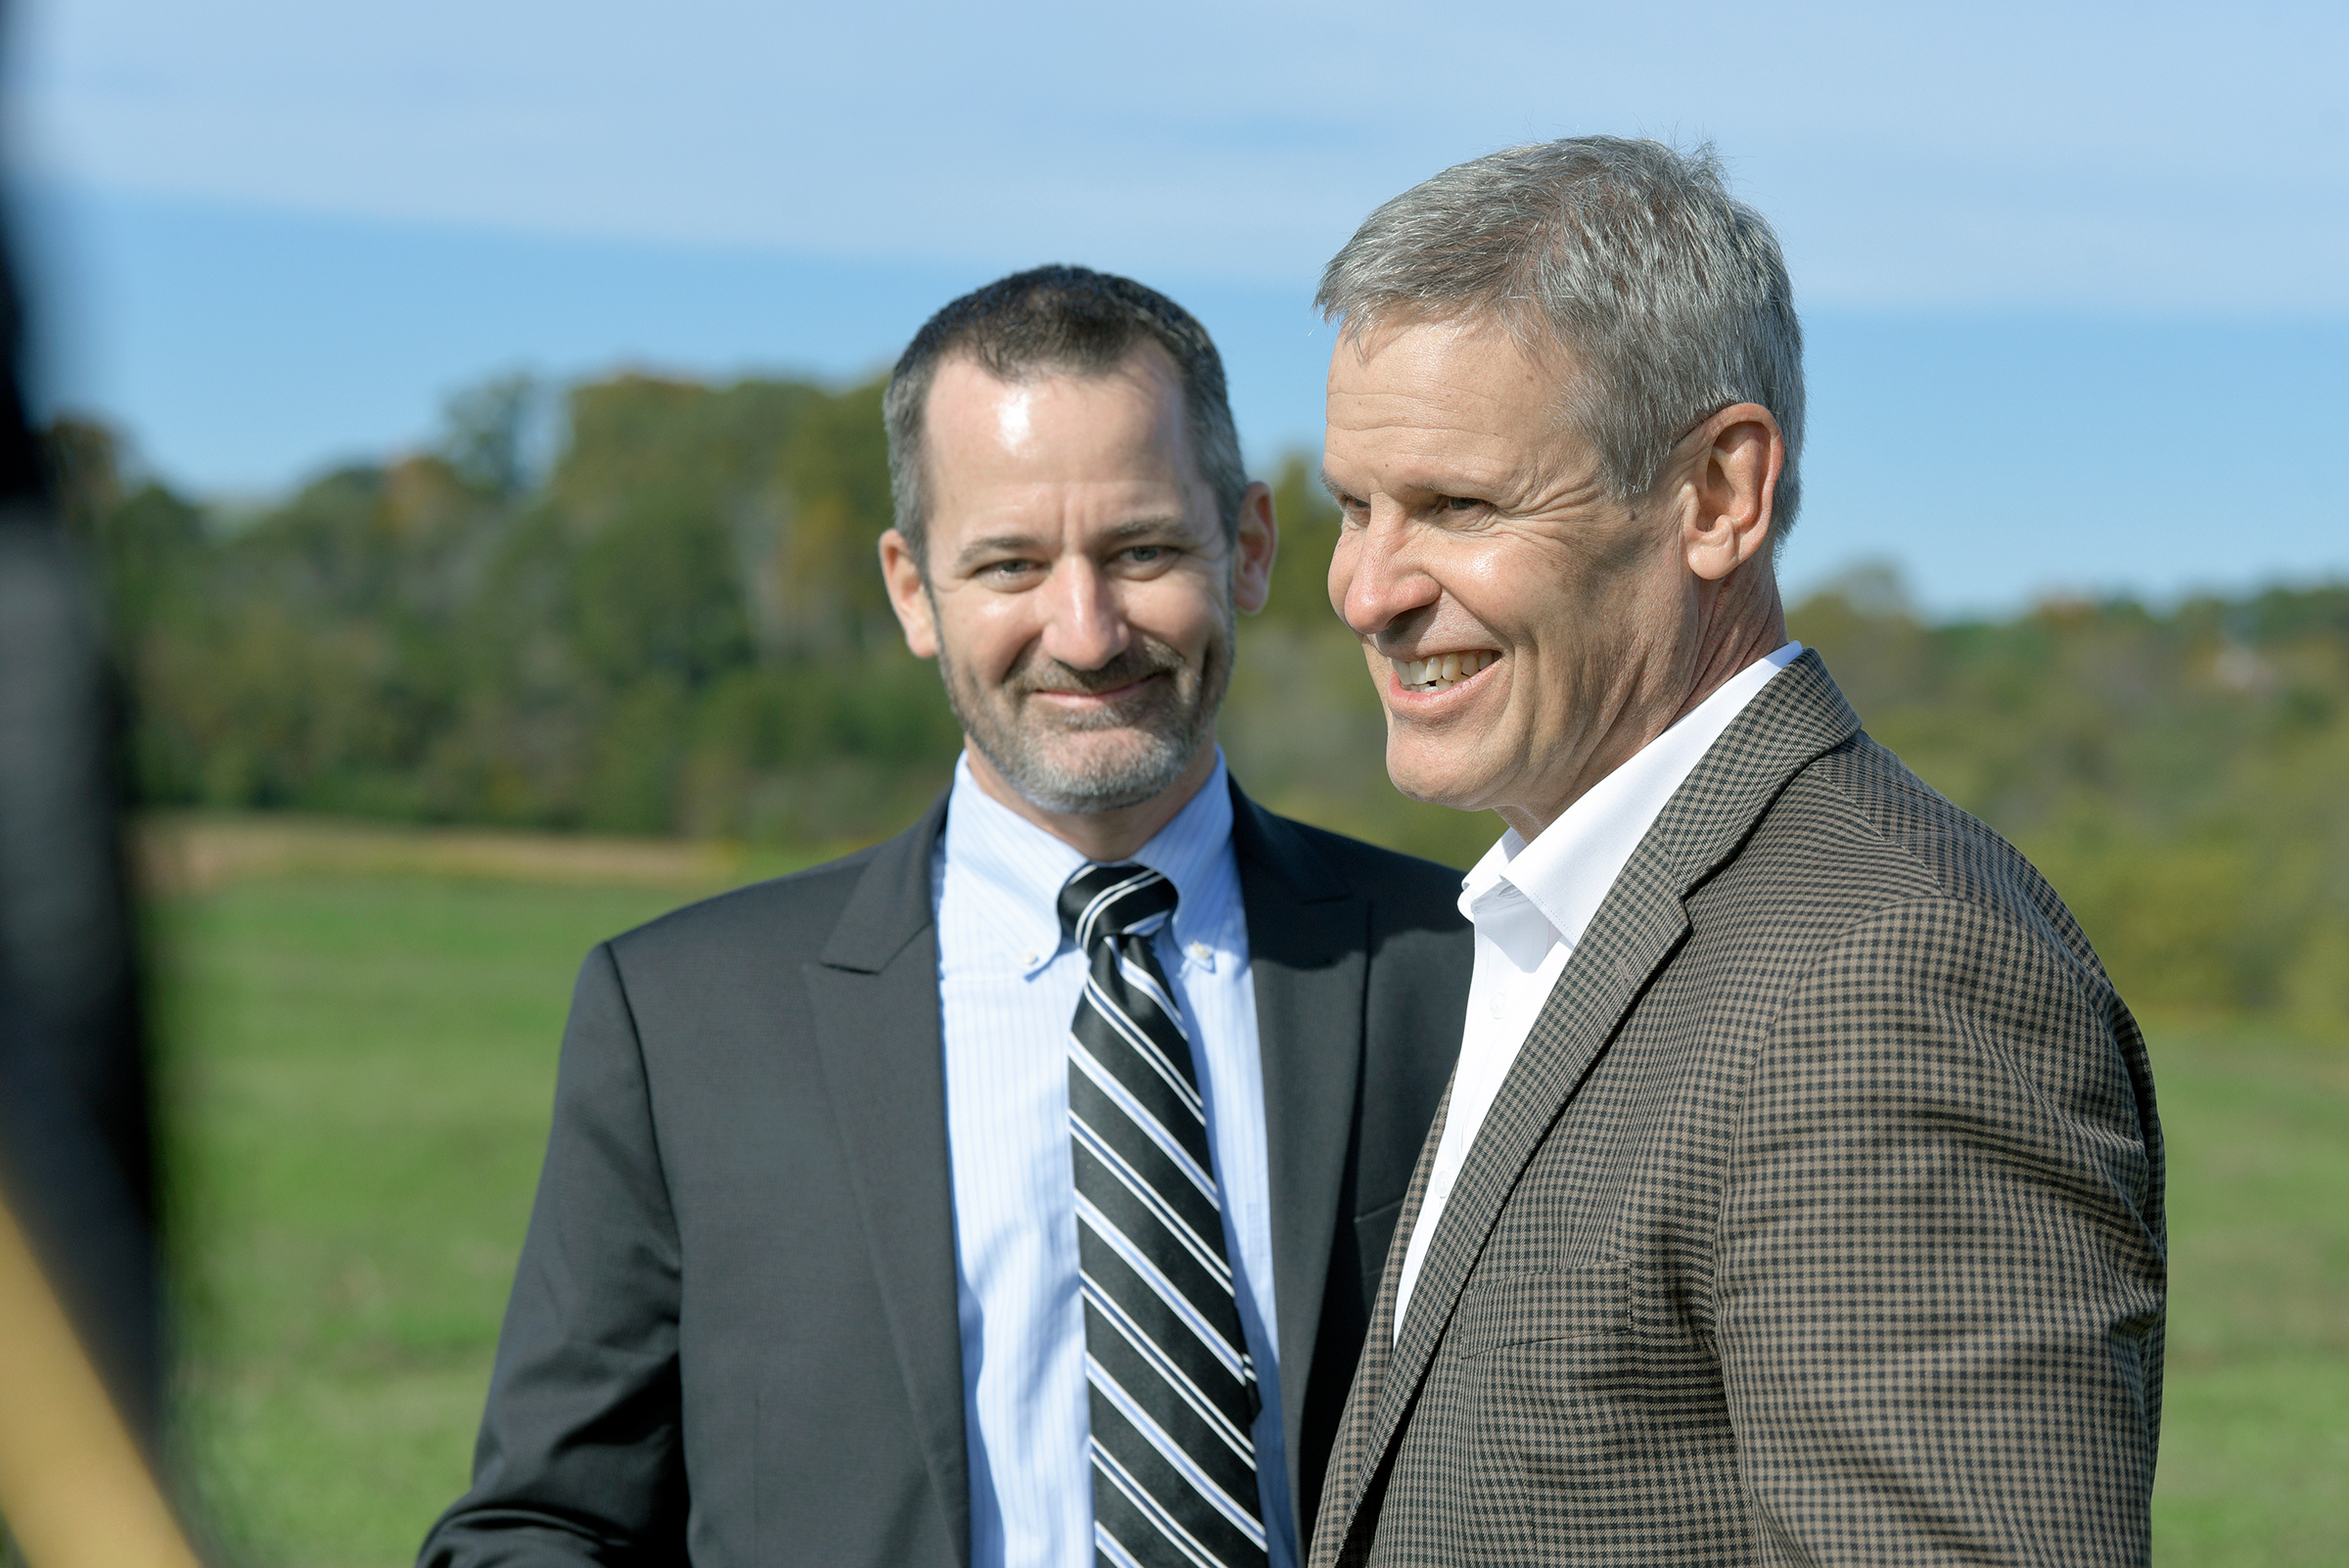 Smith and Wesson President and CEO Mark Smith, left, and Tennessee Governor Bill Lee prepare for a ground breaking ceremony for the new Tennessee location for the firearms manufacturer, November 2021 in Alcoa, Tenn. (Scott Keller—The Daily Times/AP)